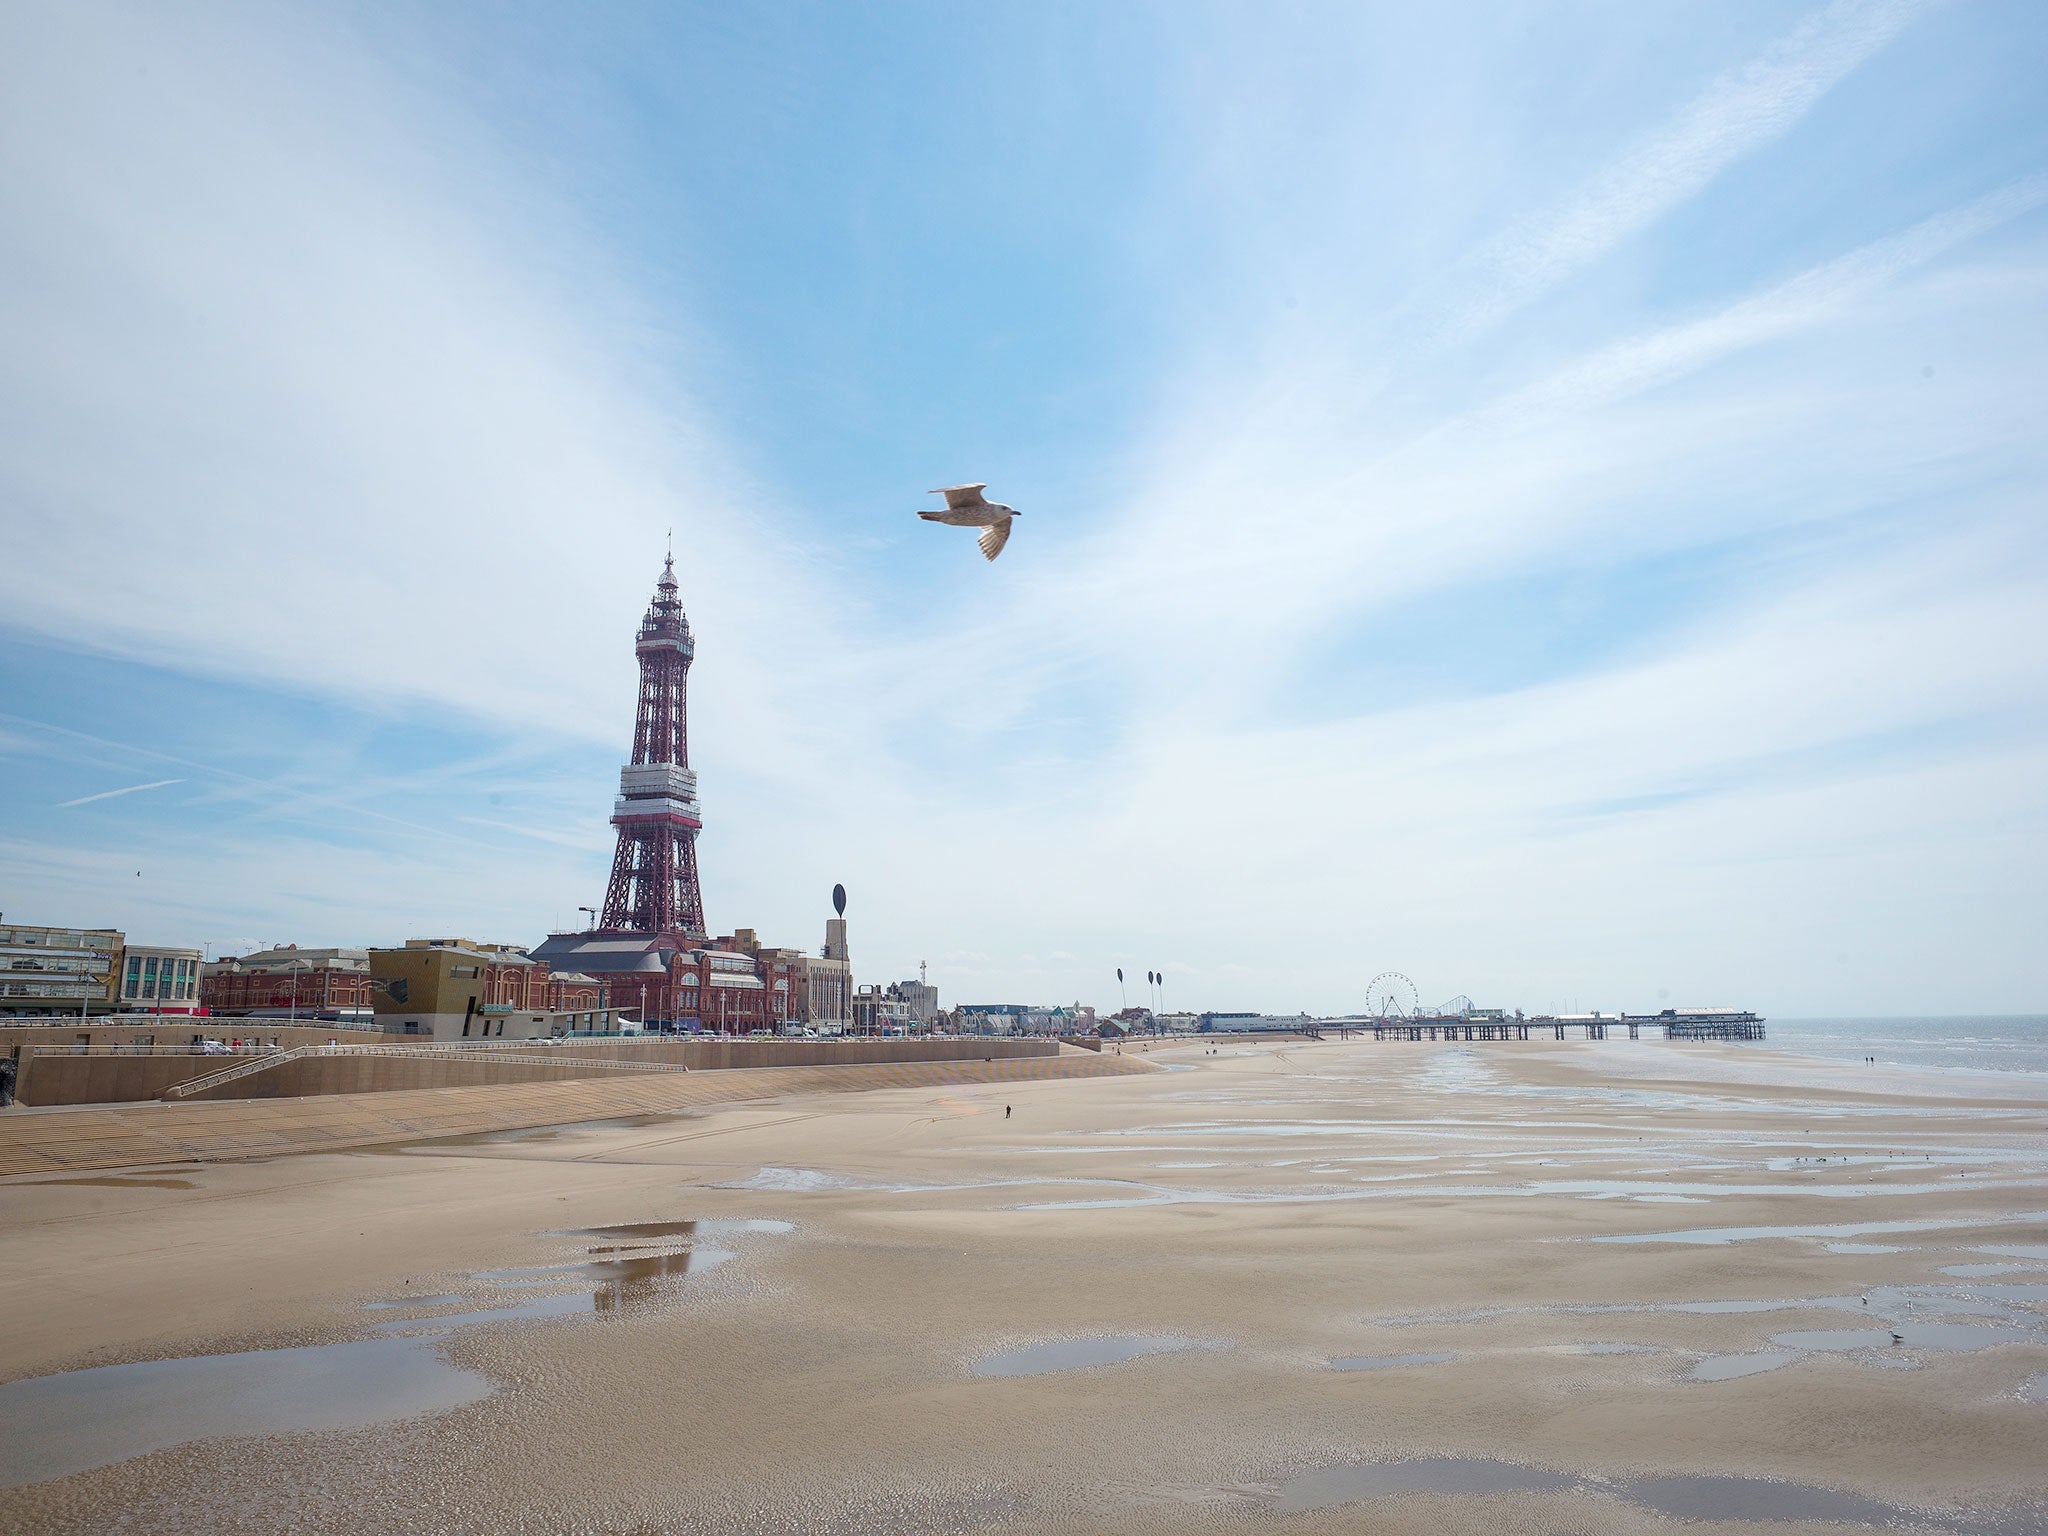 Blackpool, Lancashire is one of the cheapest places to buy property in Britain